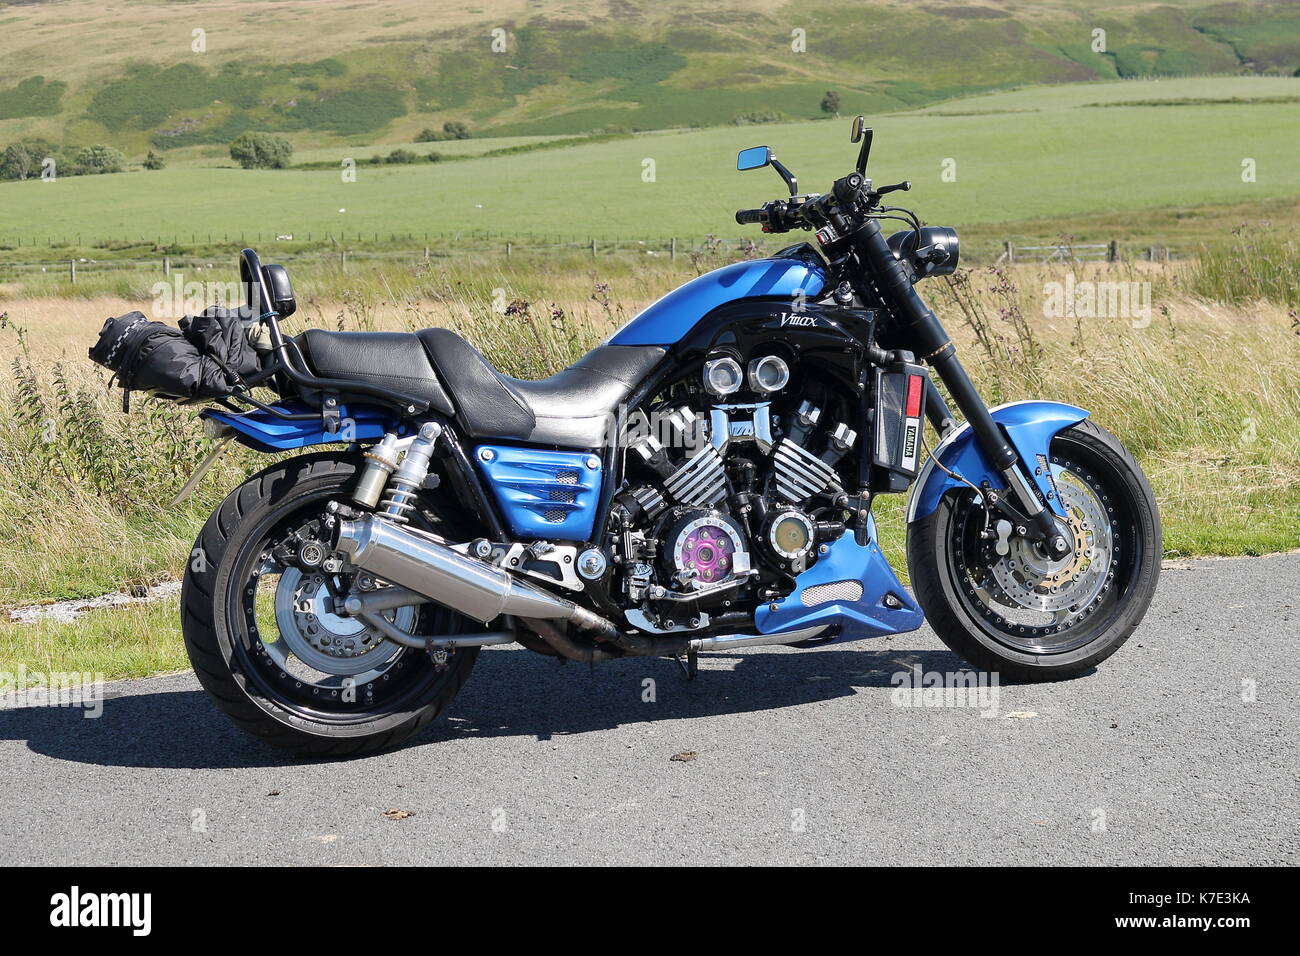 Customised Yamaha vmx 1200cc motorcycle also called  a Vmax parked on a country road in Wales on a sunny day with blue sky and rolling hills Stock Photo